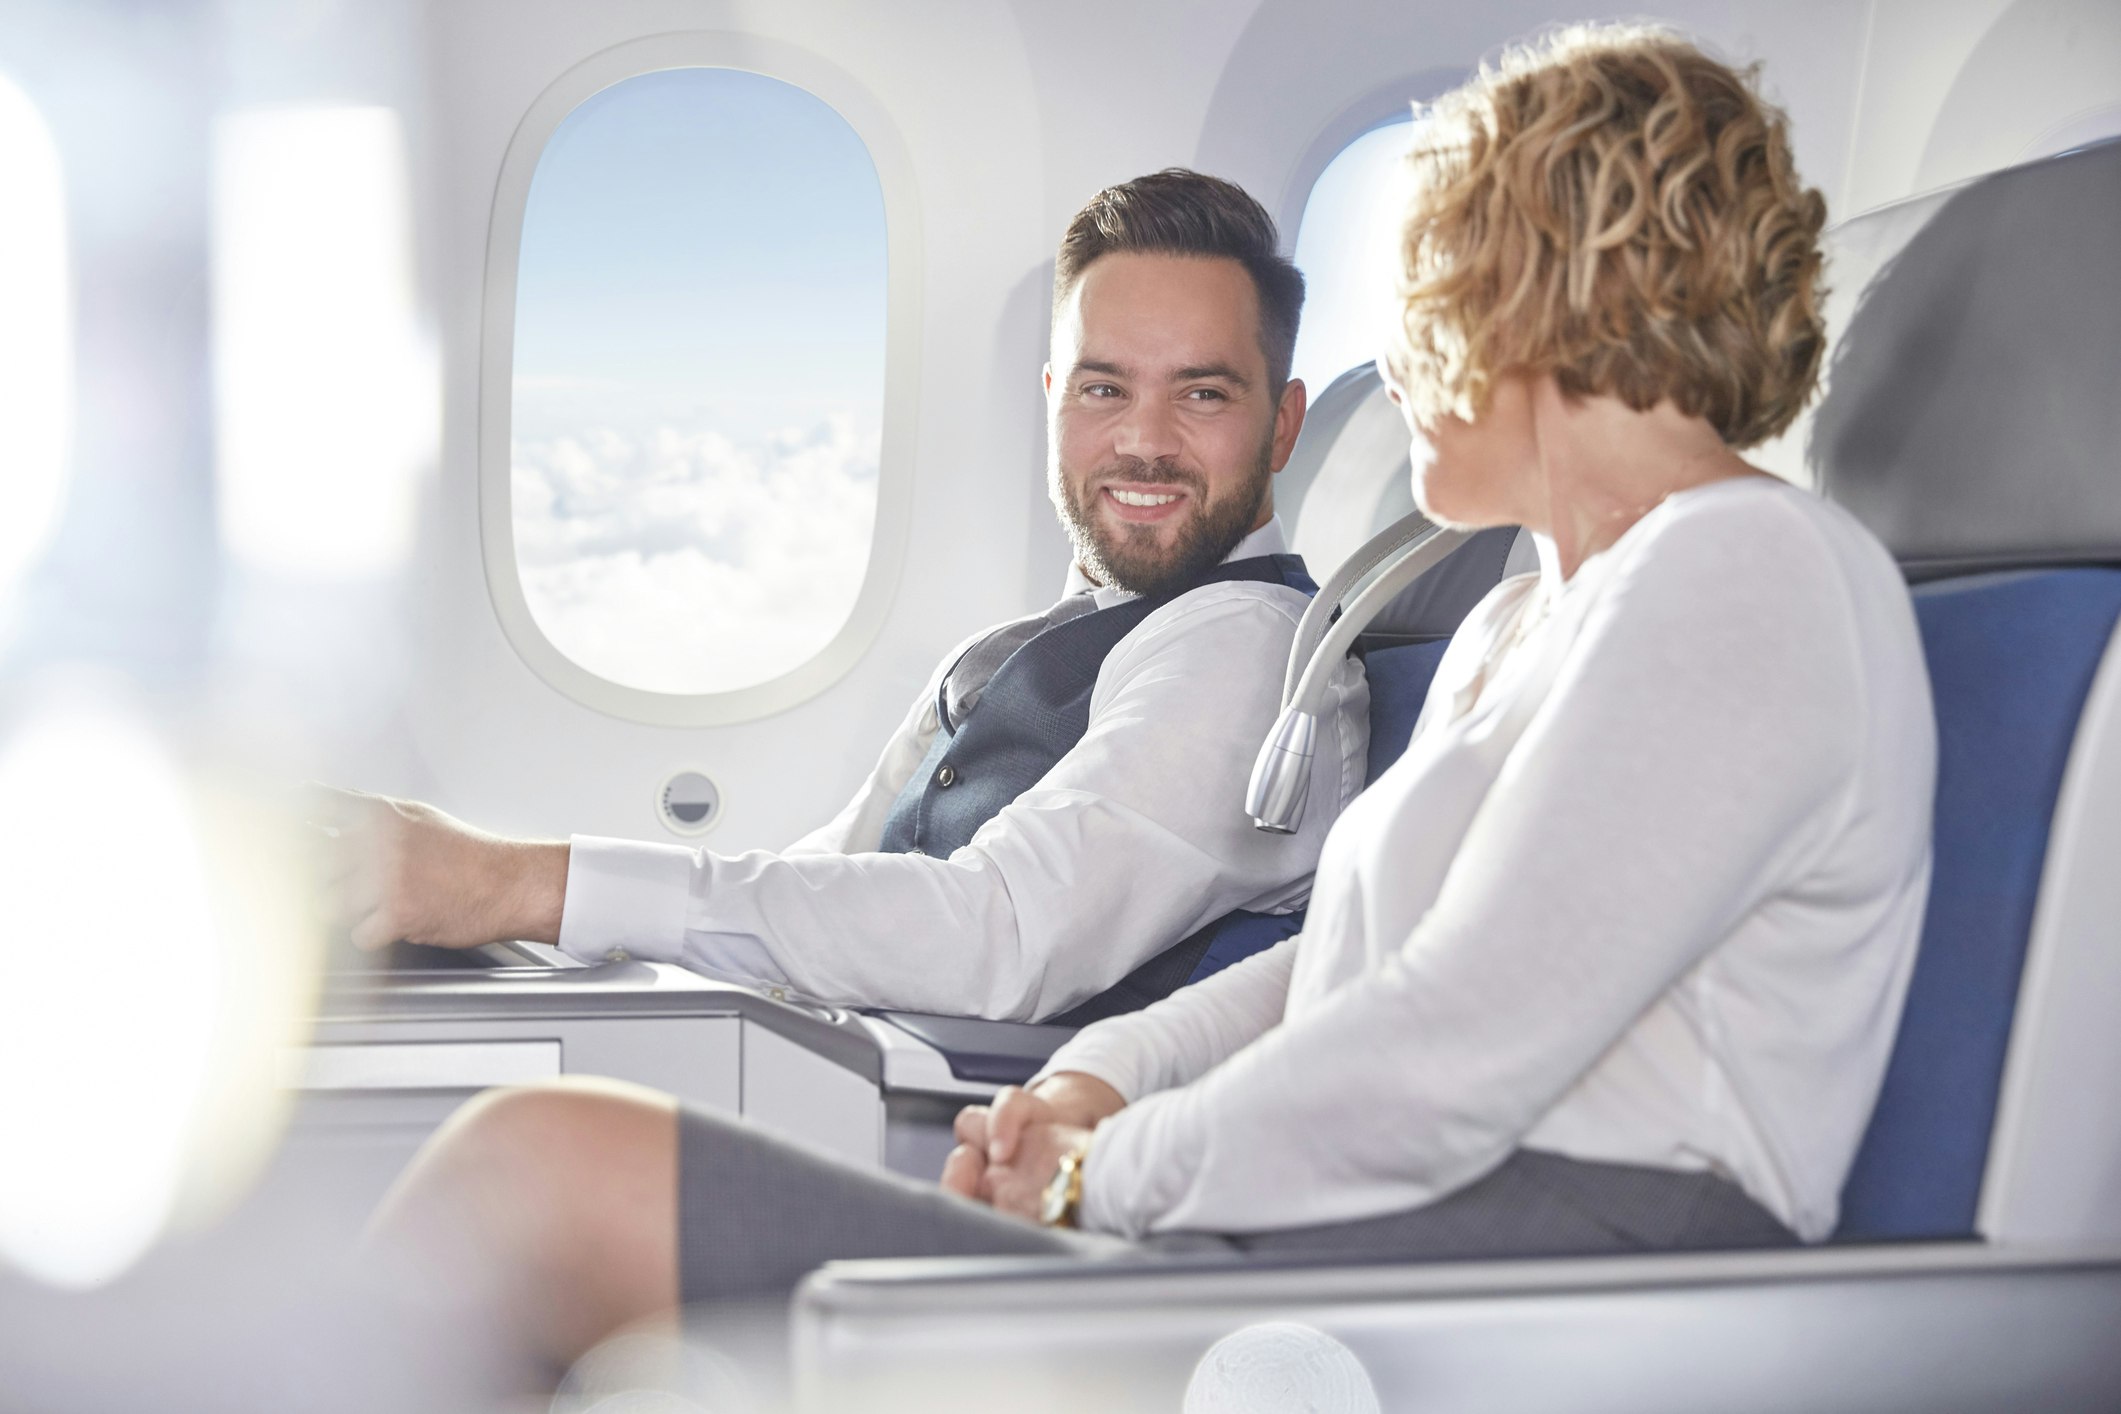 Travel News - Smiling businessman and businesswoman talking on airplane